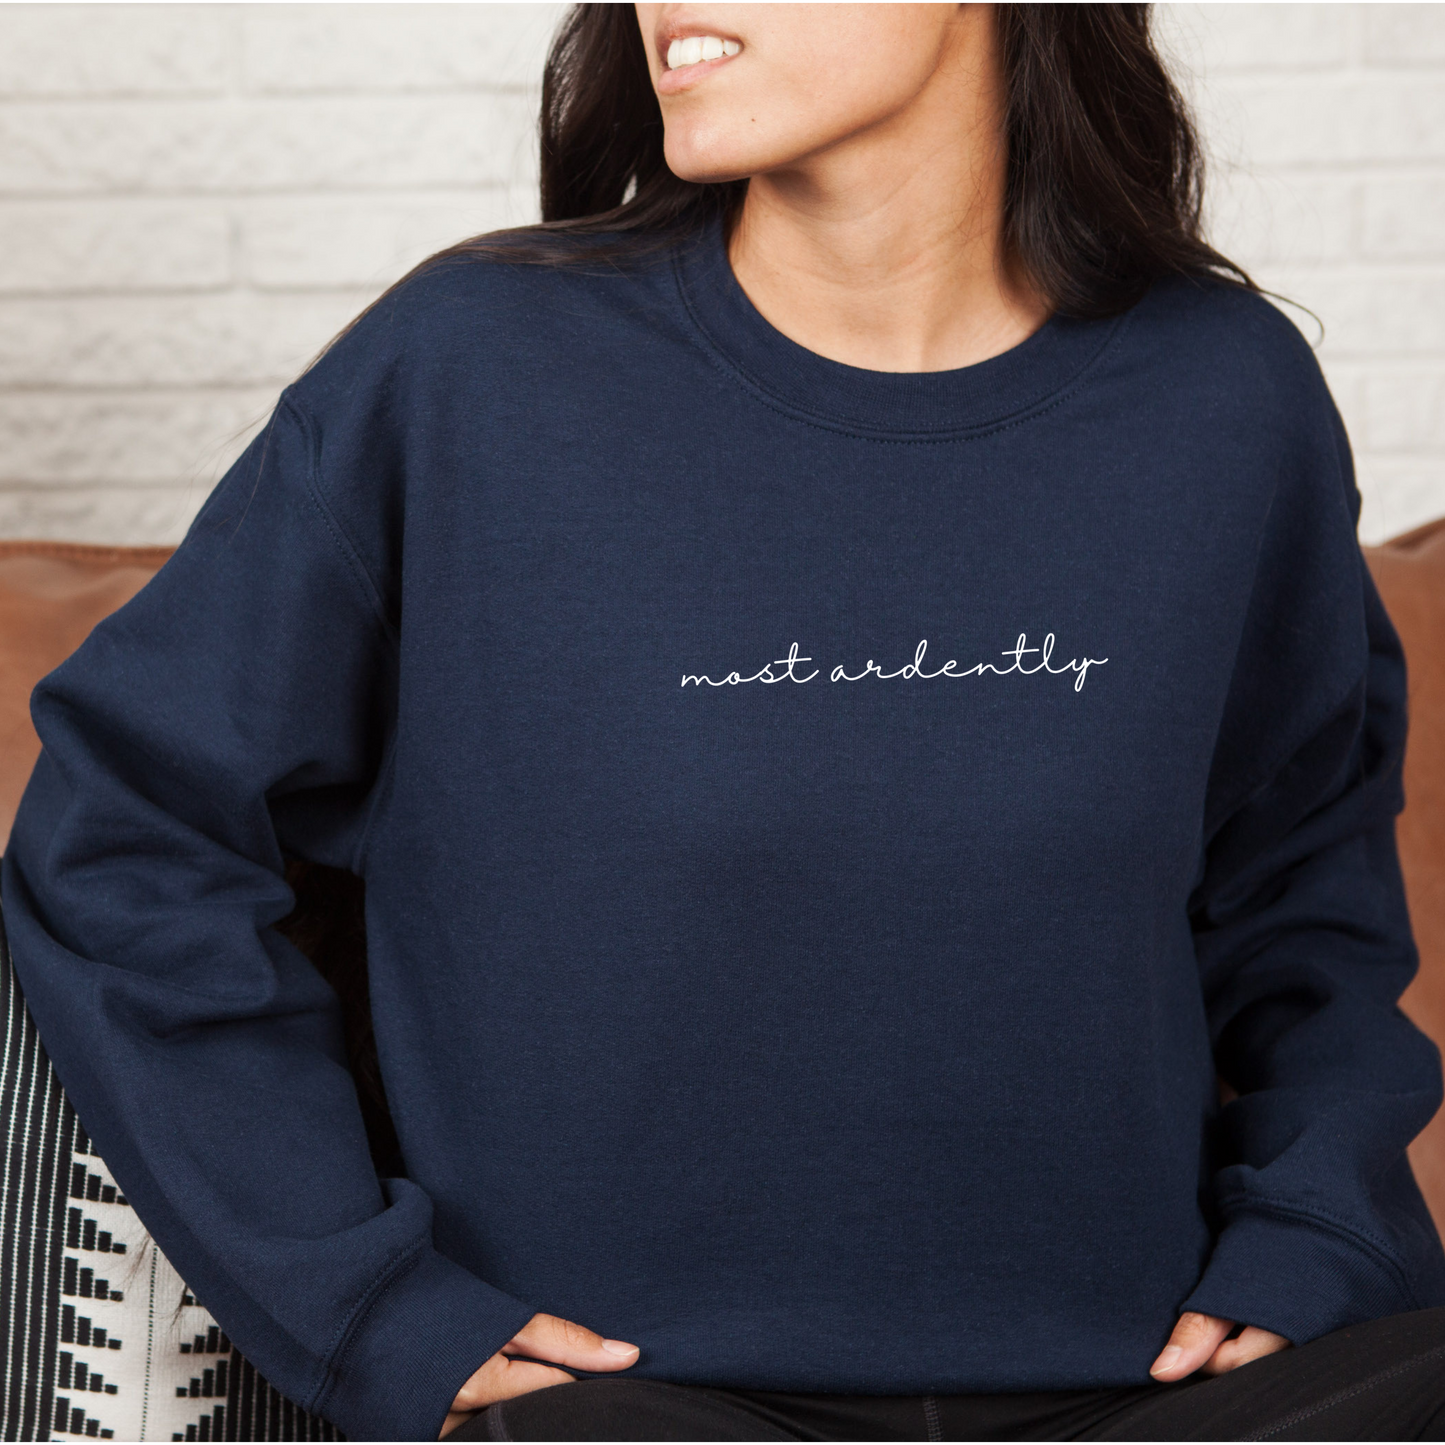 Most Ardently Embroidered Sweatshirt | Pride and Prejudice Shirt